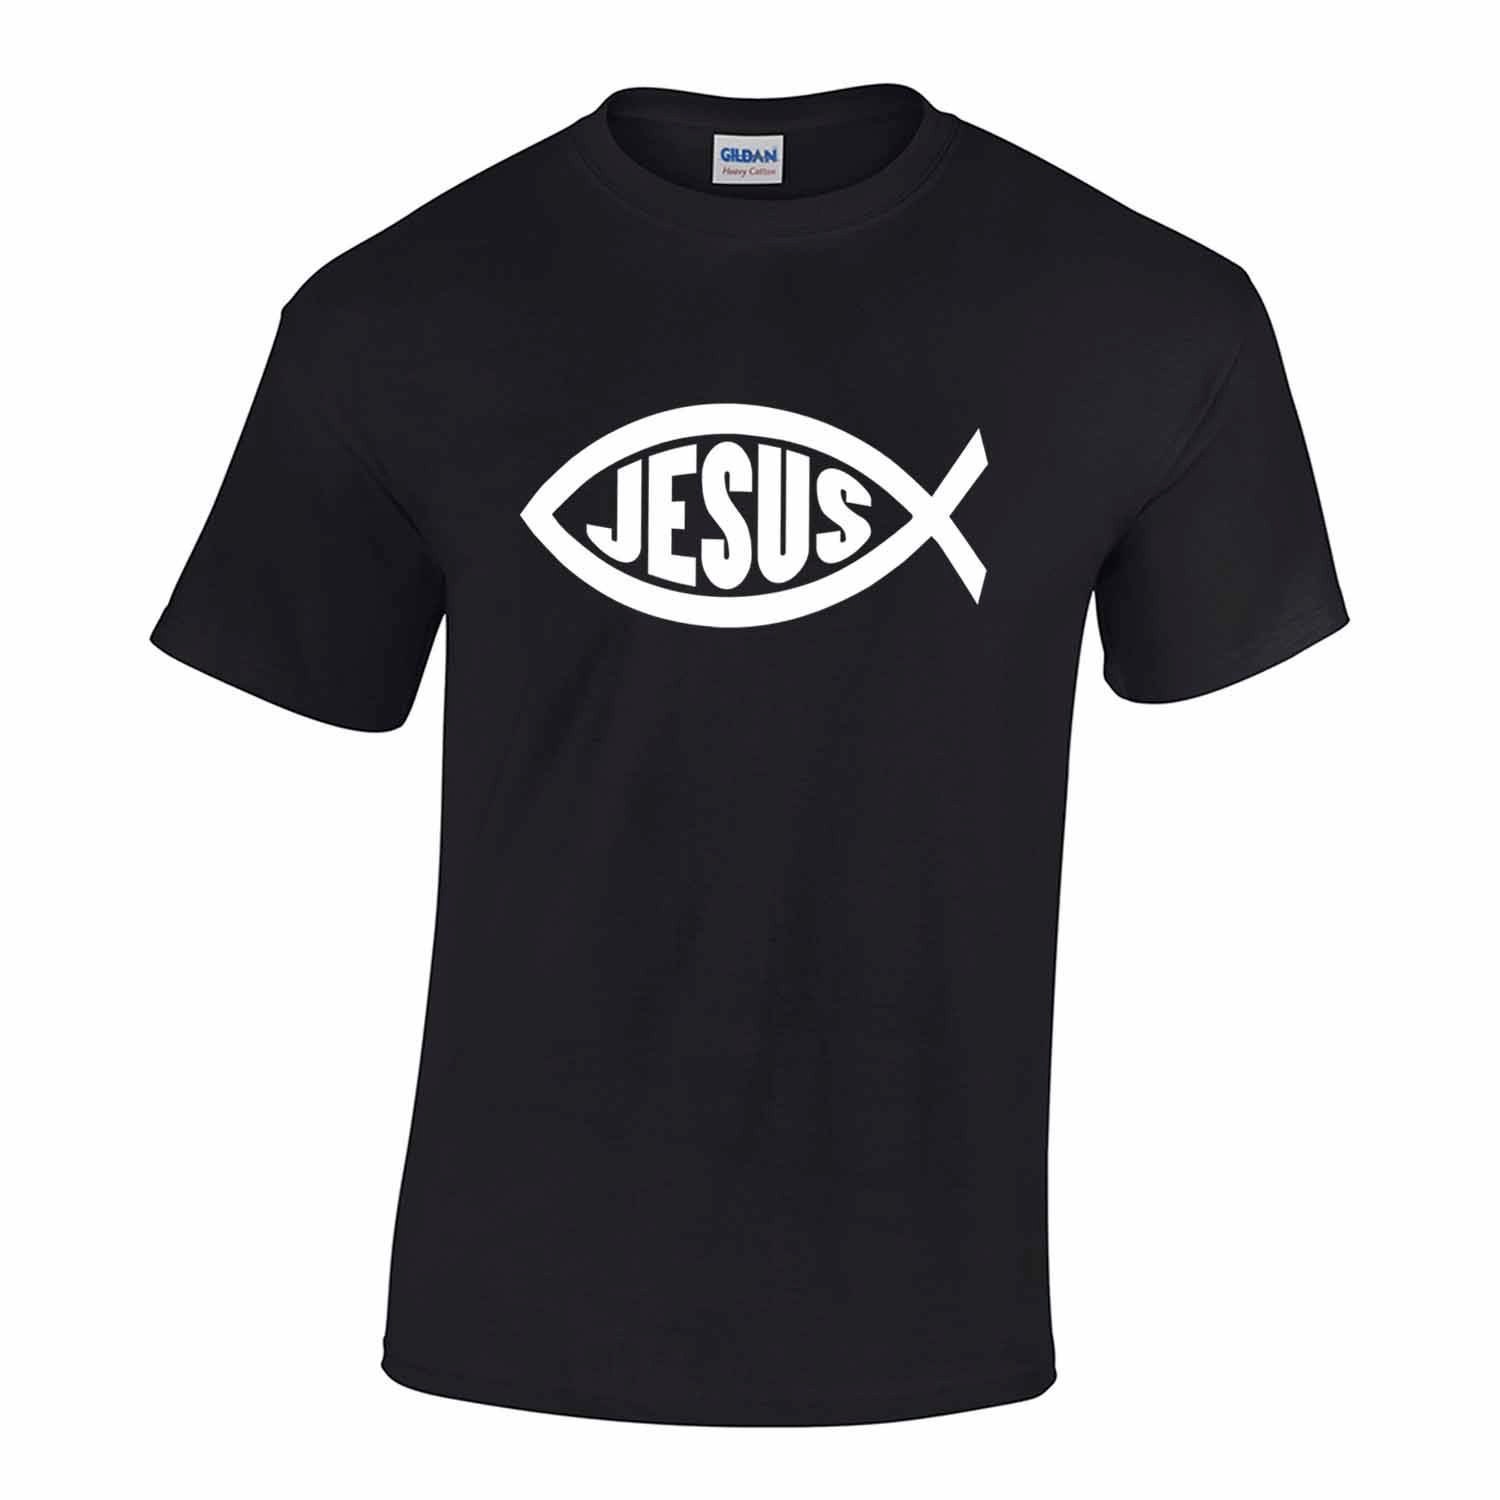 Jesus Christian Fish T-Shirt by theperfectnumber on Etsy